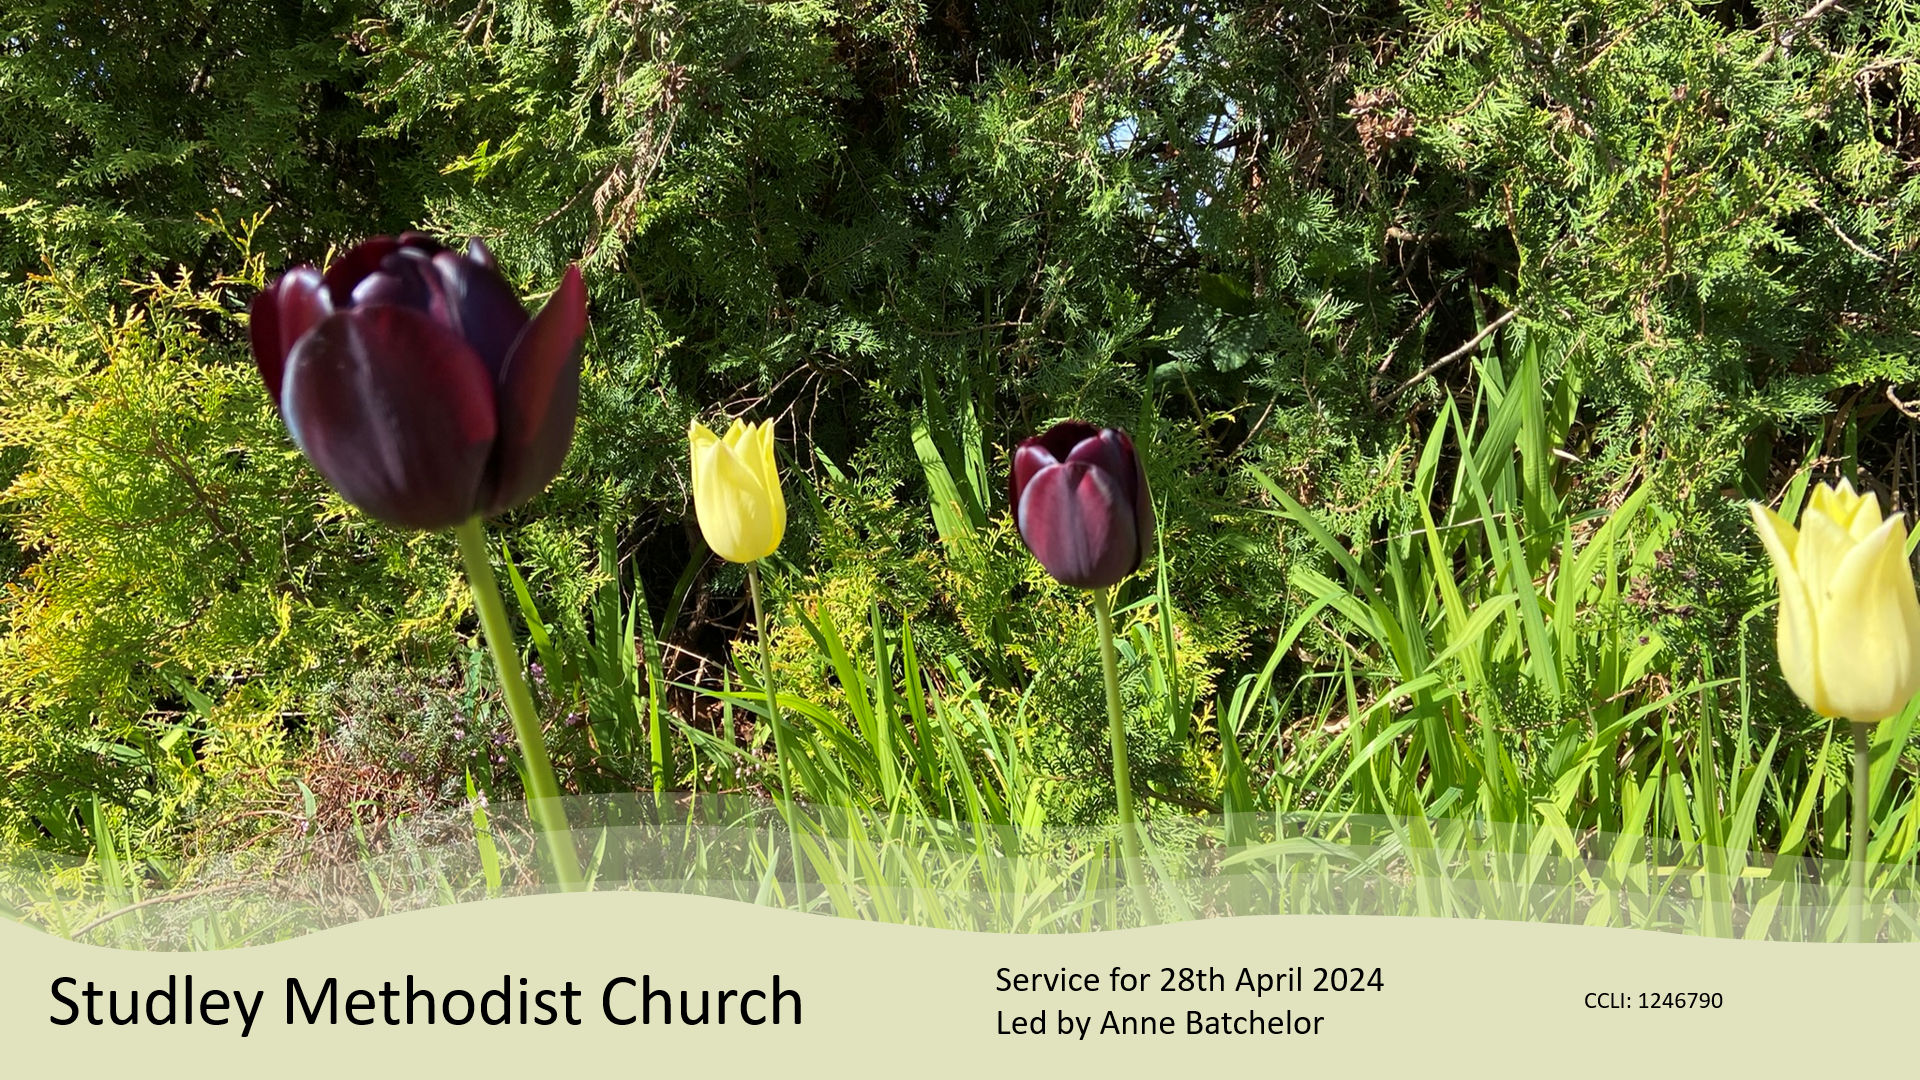 Service for 28th April 2024